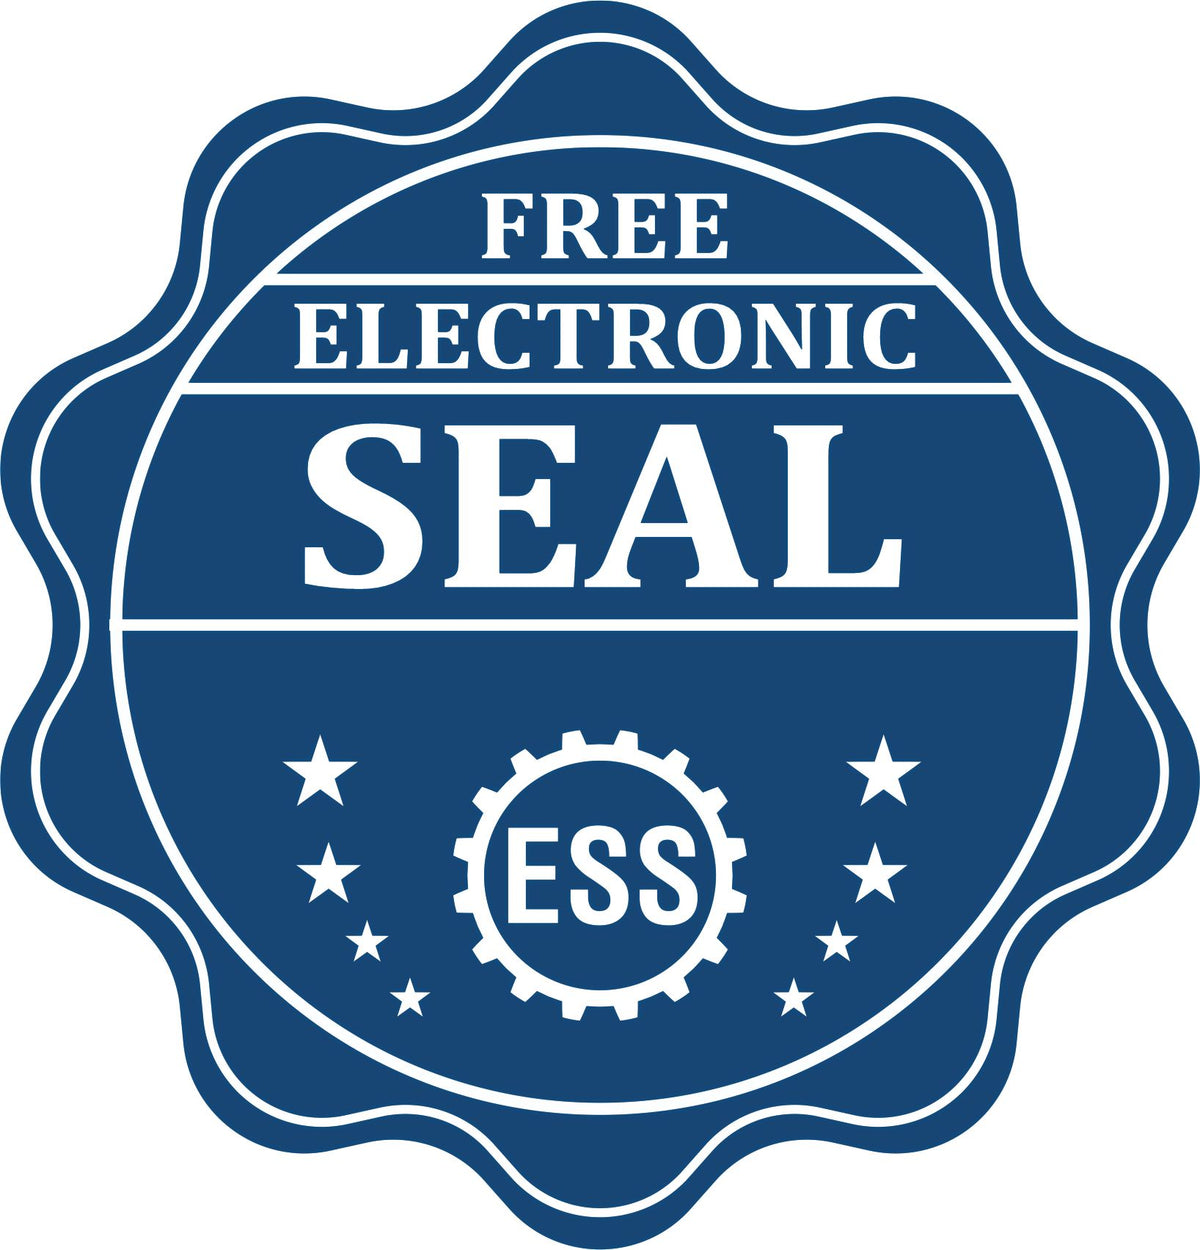 A badge showing a free electronic seal for the Handheld Iowa Professional Geologist Embosser with stars and the ESS gear on the emblem.